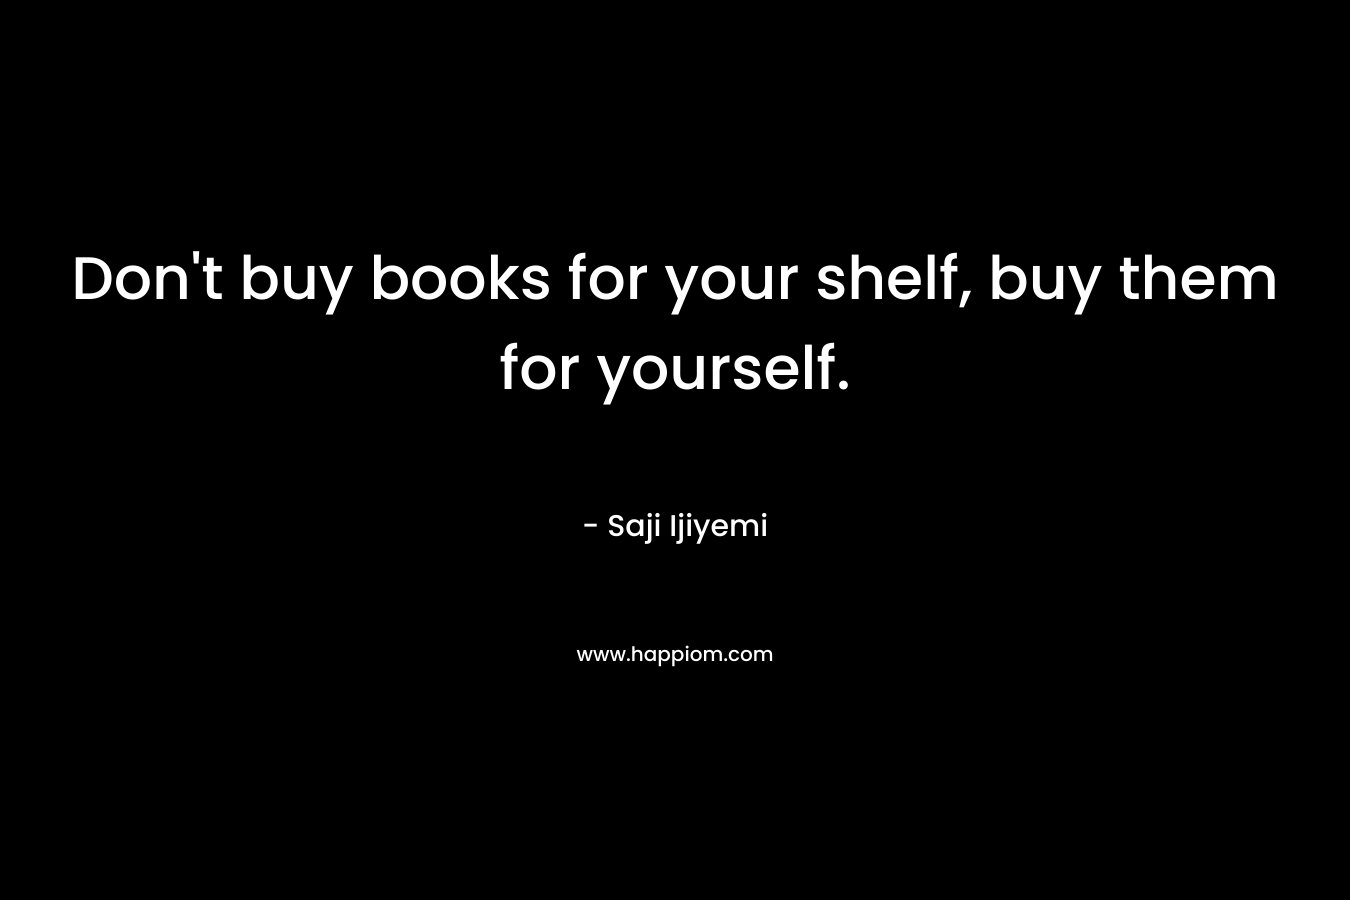 Don't buy books for your shelf, buy them for yourself.